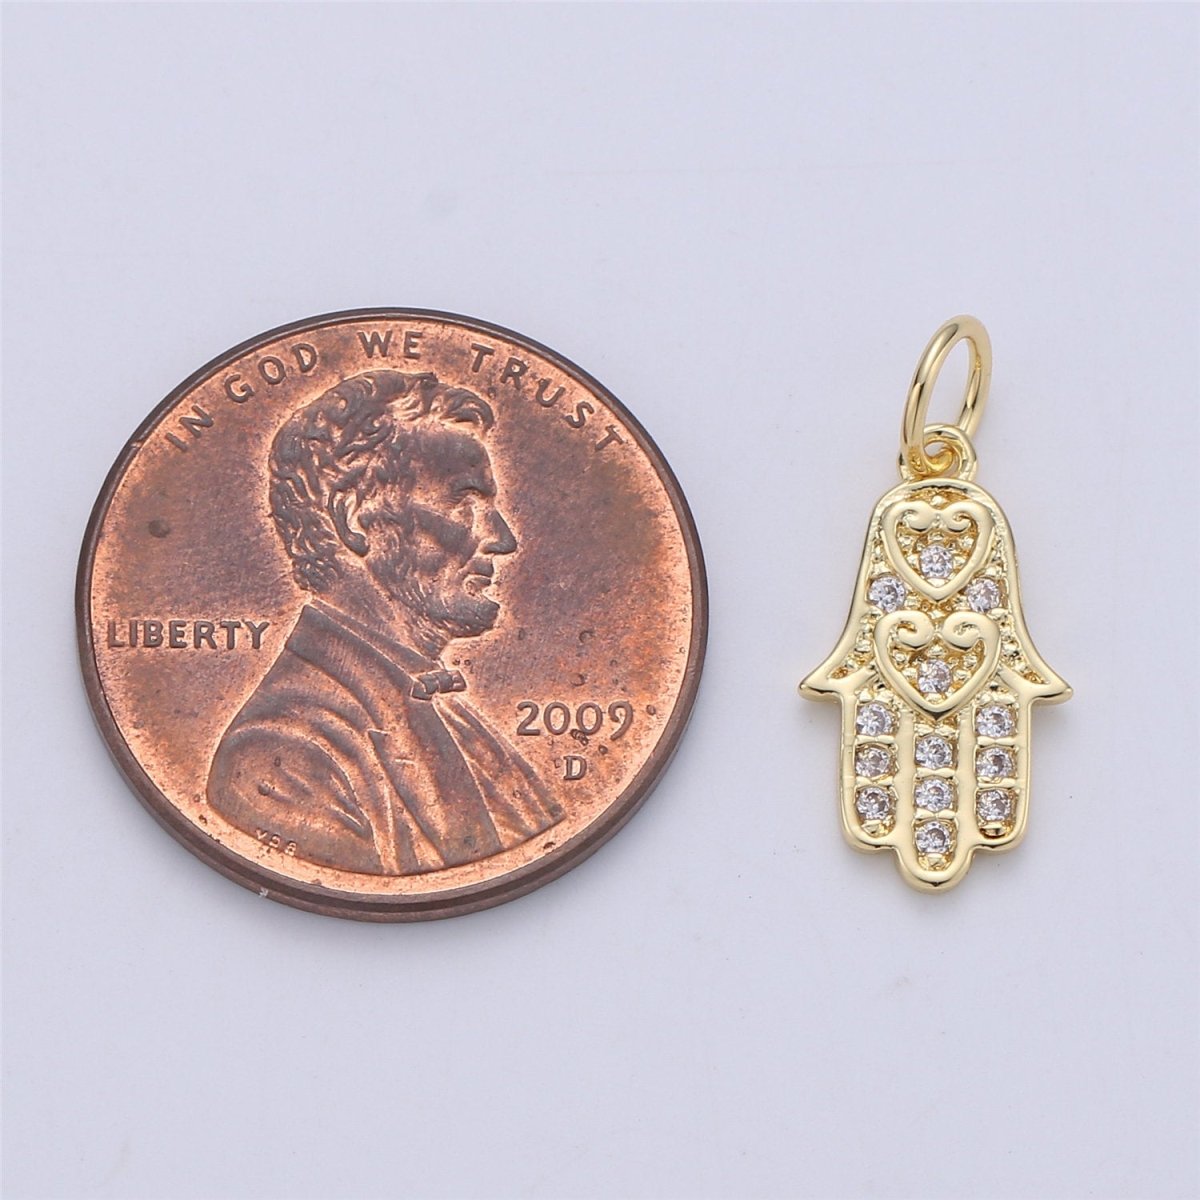 14k Gold Filled Hamsa Hand Charm Silver Hamsa Charm Micro Pave Charm, Amulet jewelry, Hand of fatima jewelry for Necklace Earring Bracelet C-839 E-913 - DLUXCA